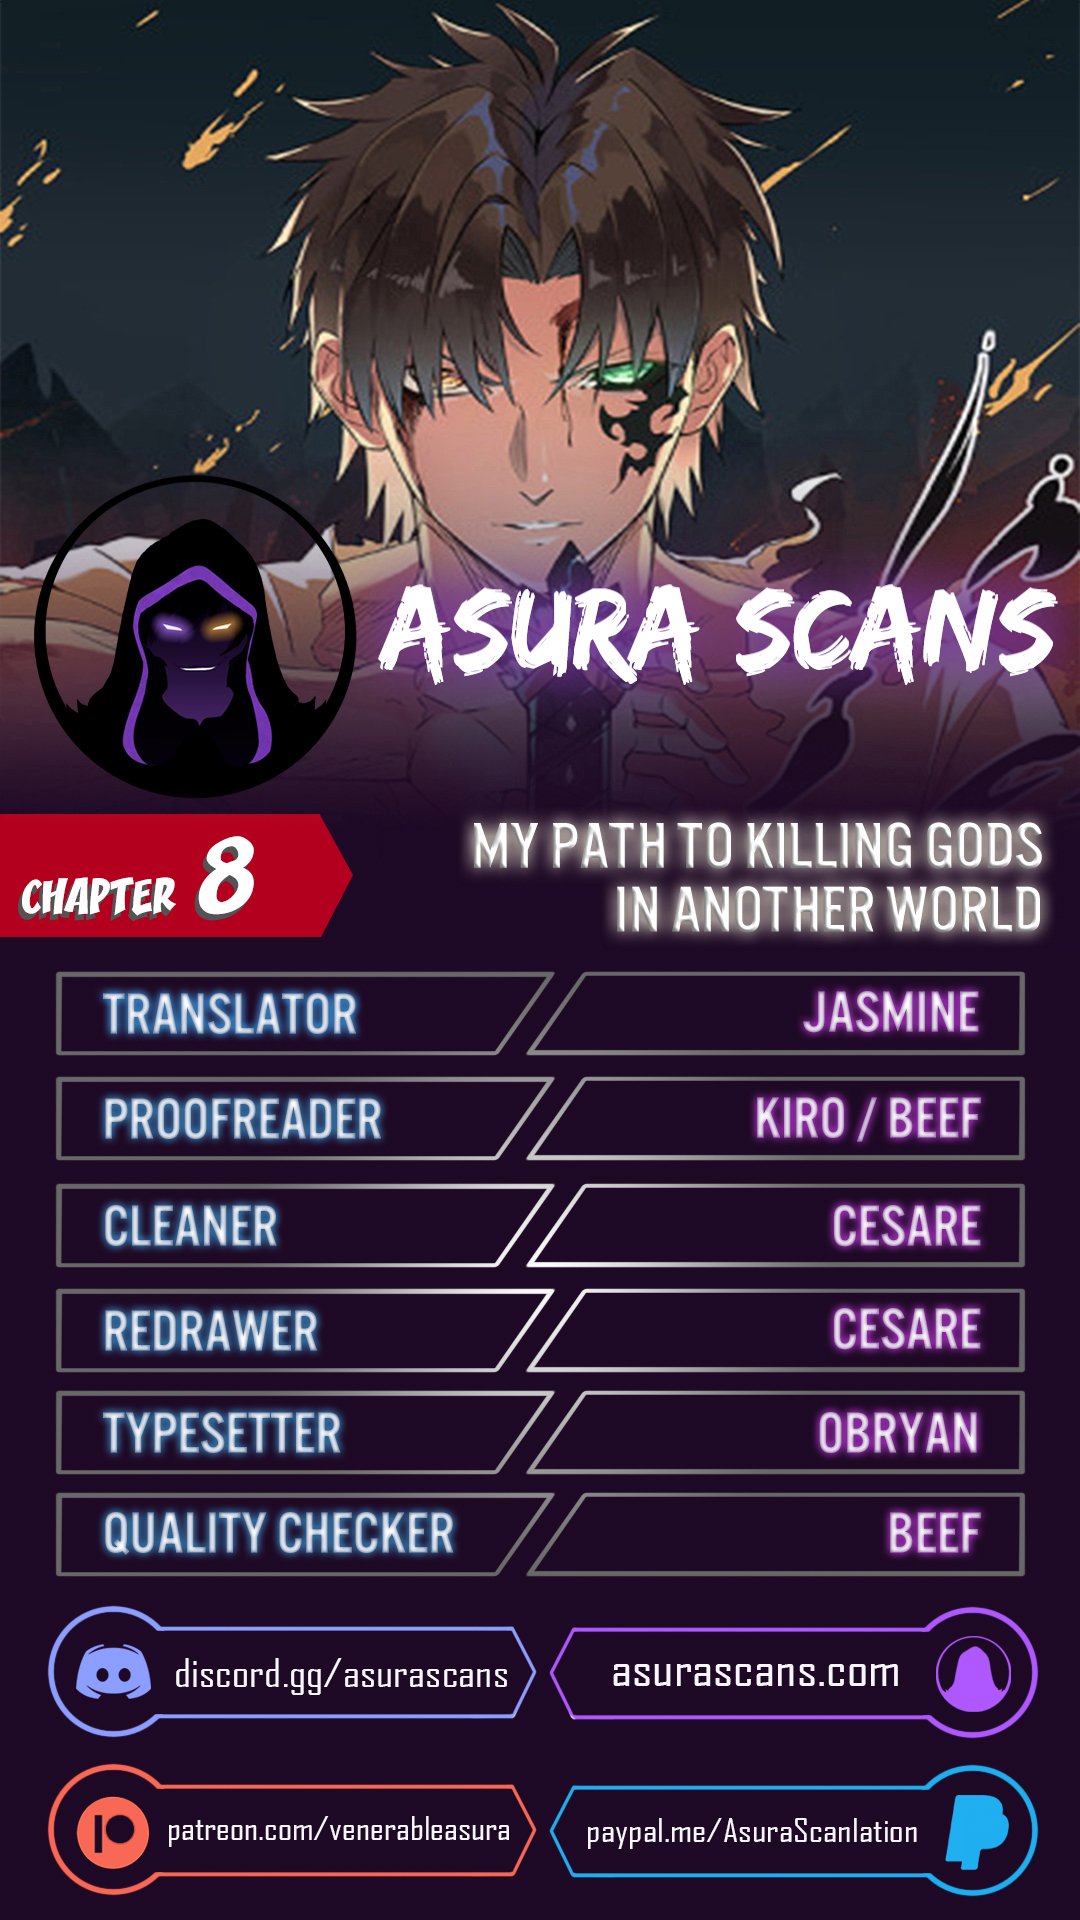 My Path to Killing Gods in Another World - Chapter 23159 - Image 1